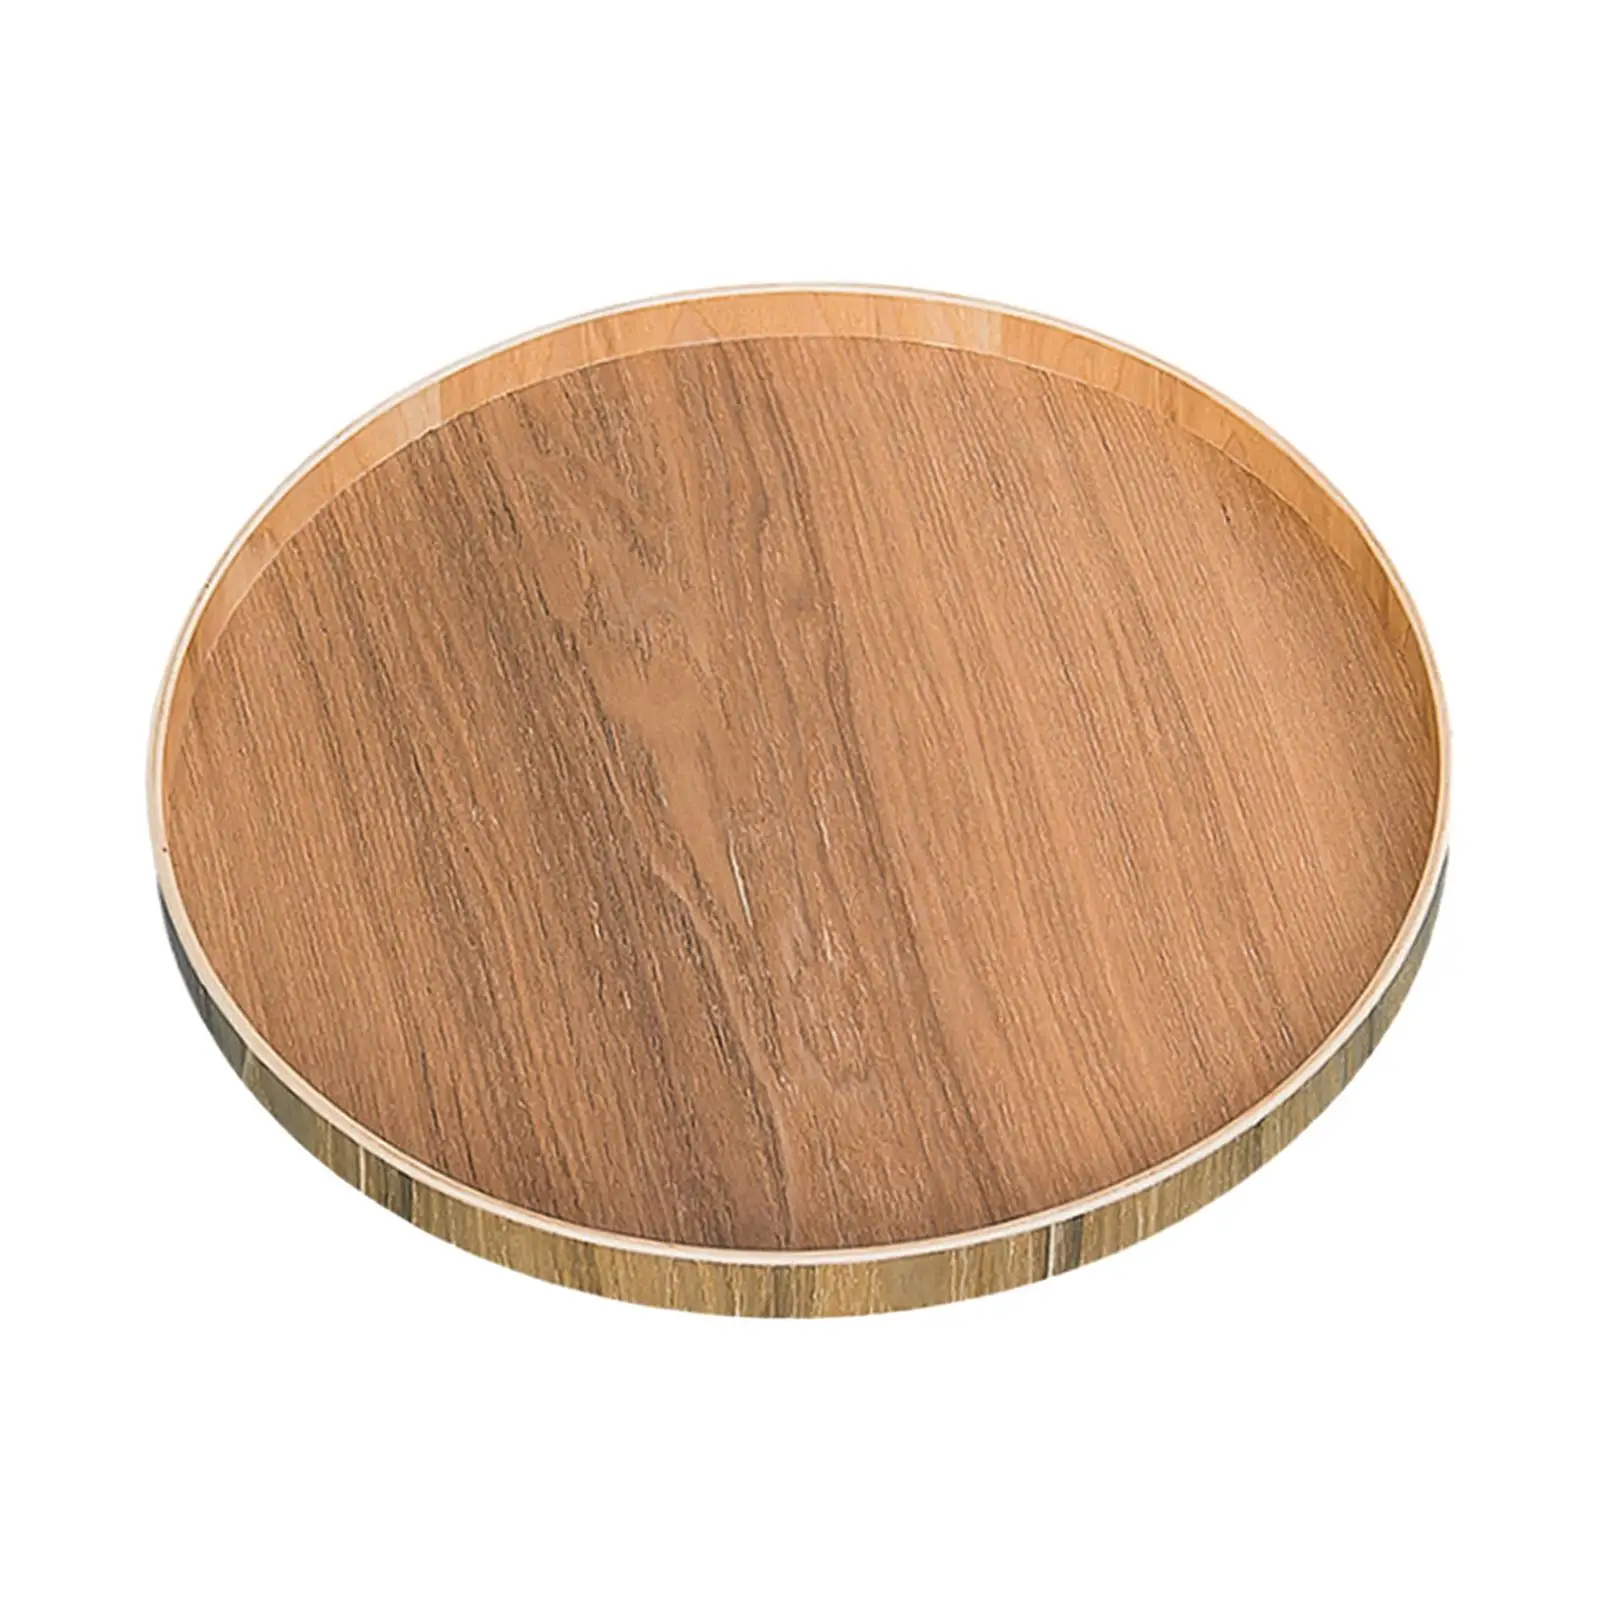 Wooden Serving Tray Breakfast Tray for Table Centerpiece Bathroom Kitchen